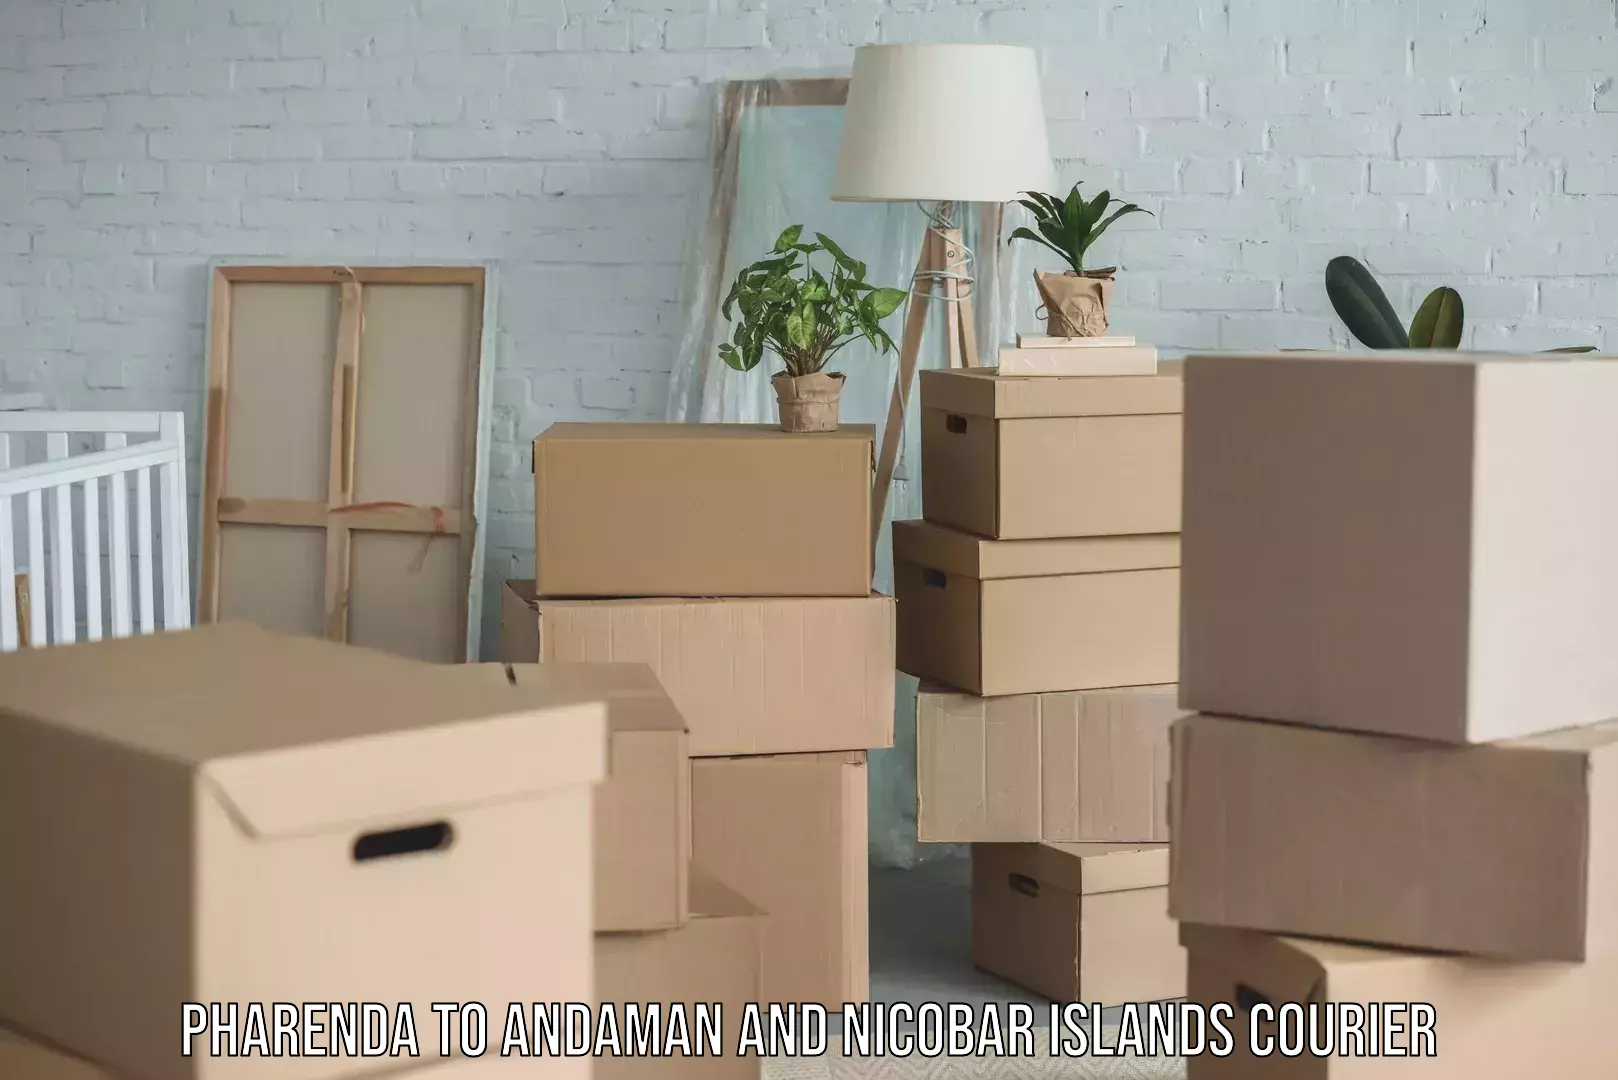 Professional furniture movers in Pharenda to Andaman and Nicobar Islands